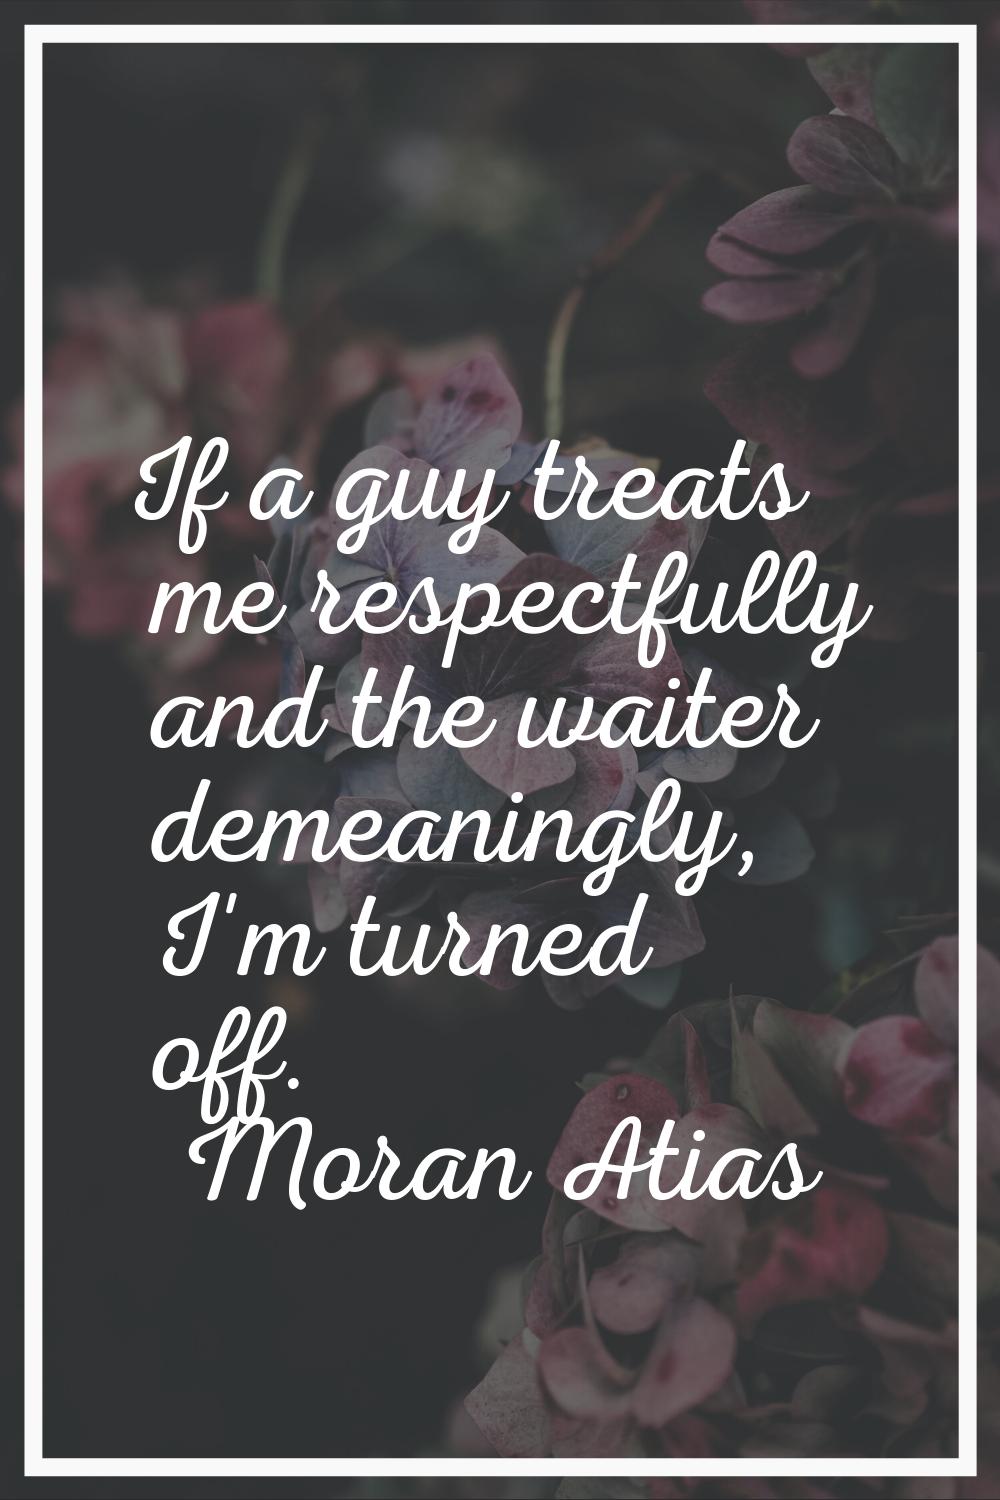 If a guy treats me respectfully and the waiter demeaningly, I'm turned off.